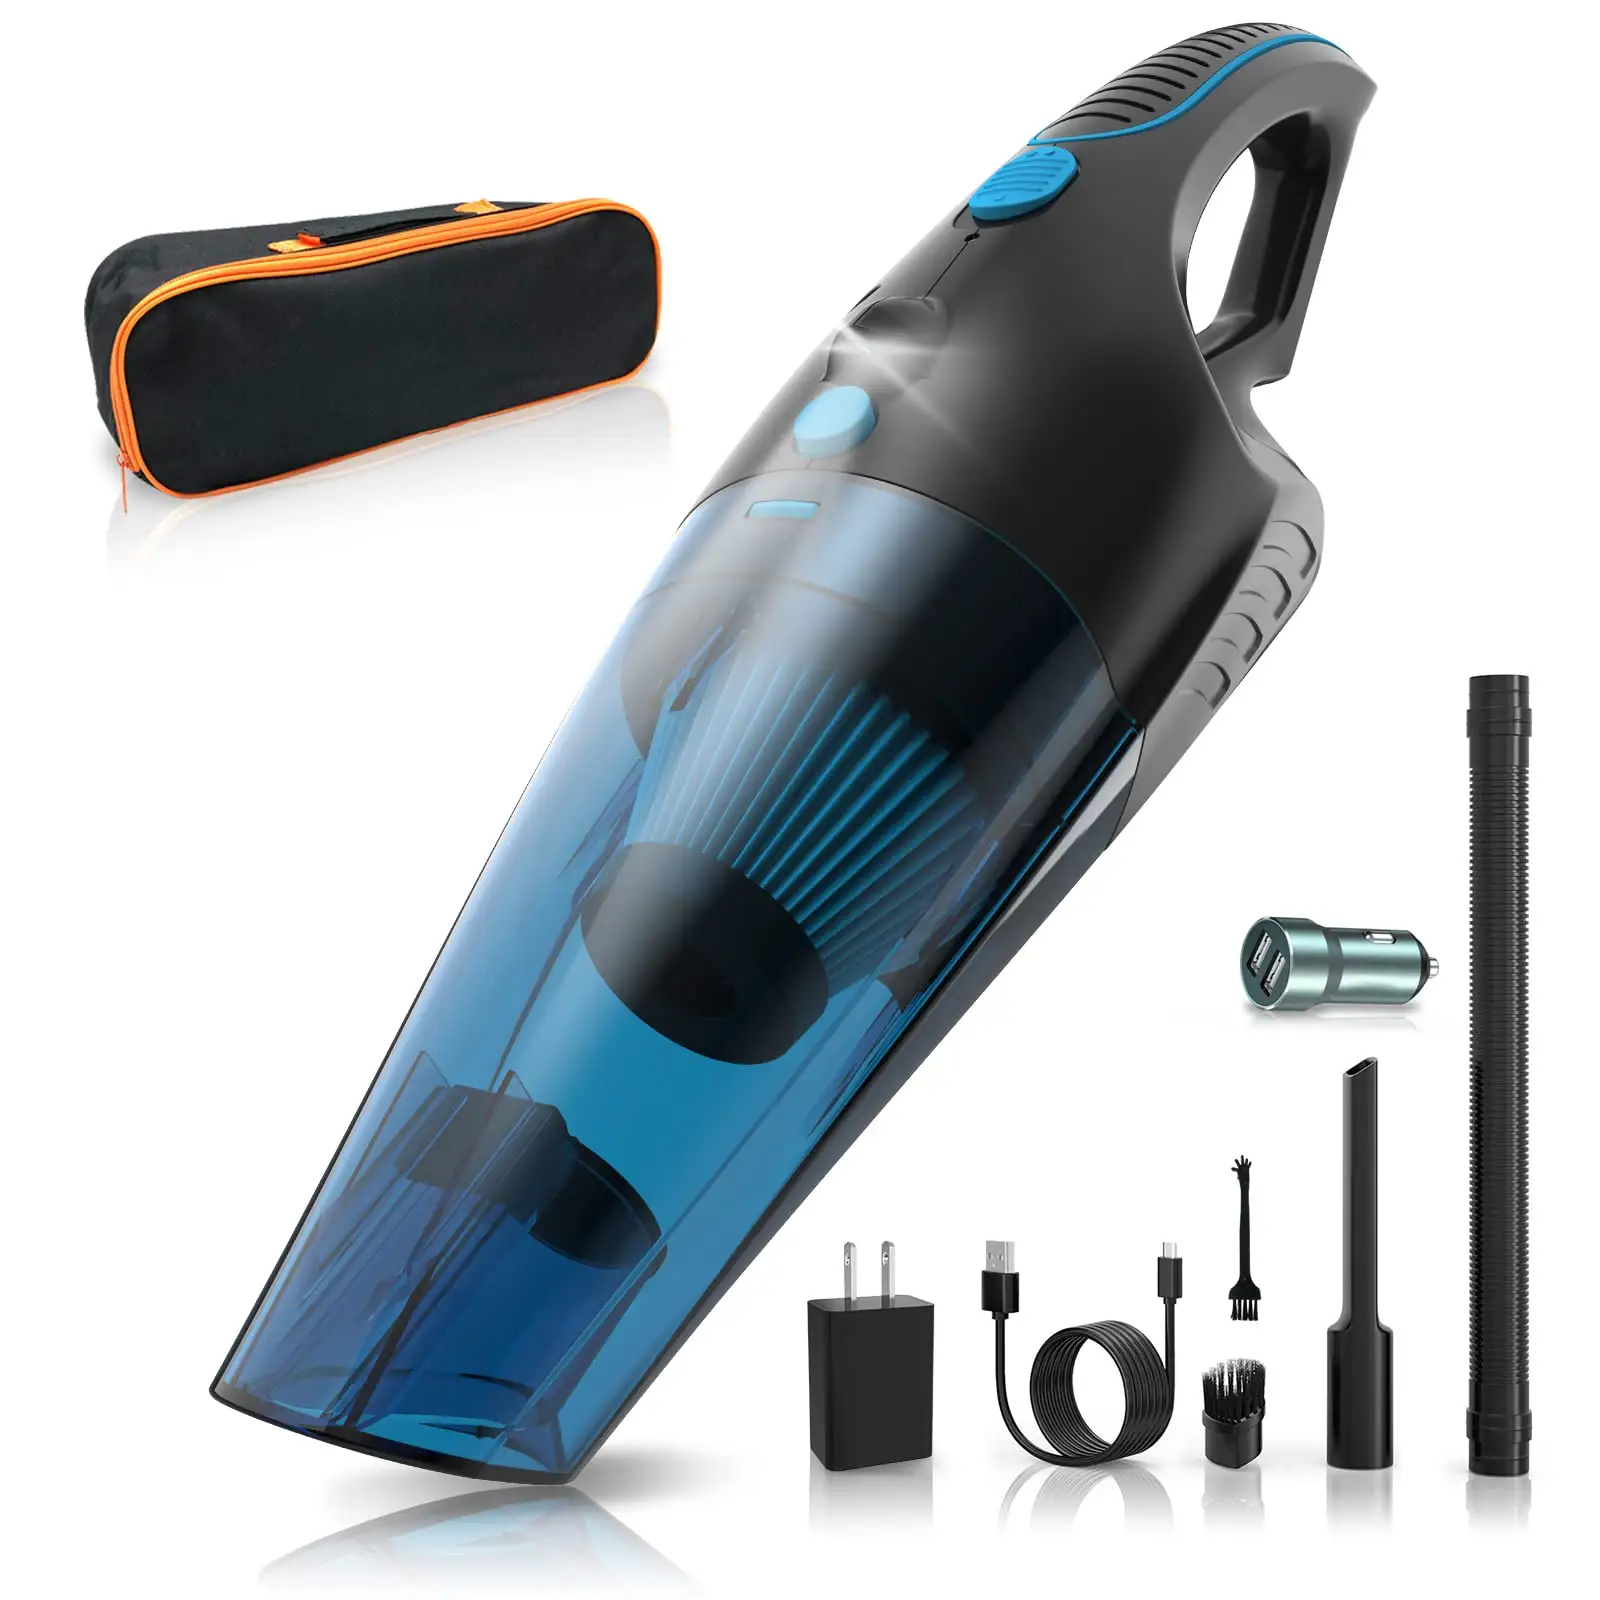 Car Vacuum Cleaner Portable Wired Handheld 120W Auto Vacuum Cleaner 12V Mini Car Vaccum Cleaners For Car Interior Cleaning